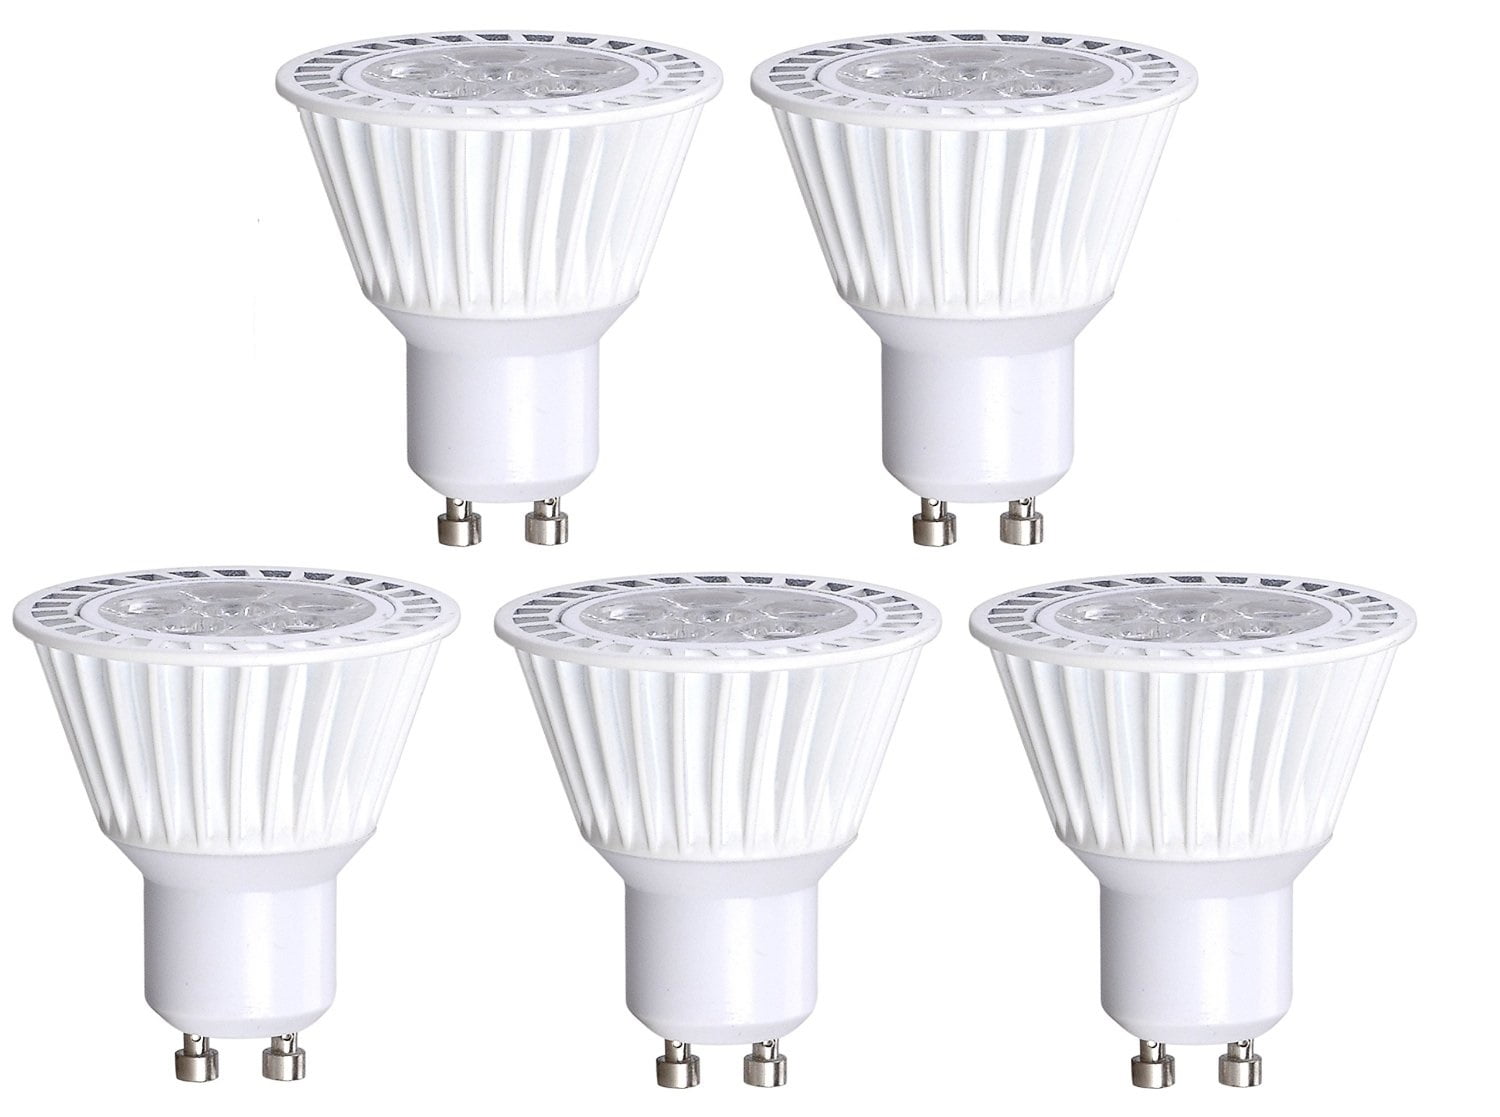 HLIGHT Spot Light Dimmable GU10 Base 6W LED Lamp Beautiful 6000K 500lm Day White 50W Replacement for Halogen Bulb Room Hotel 10PACK,3000k